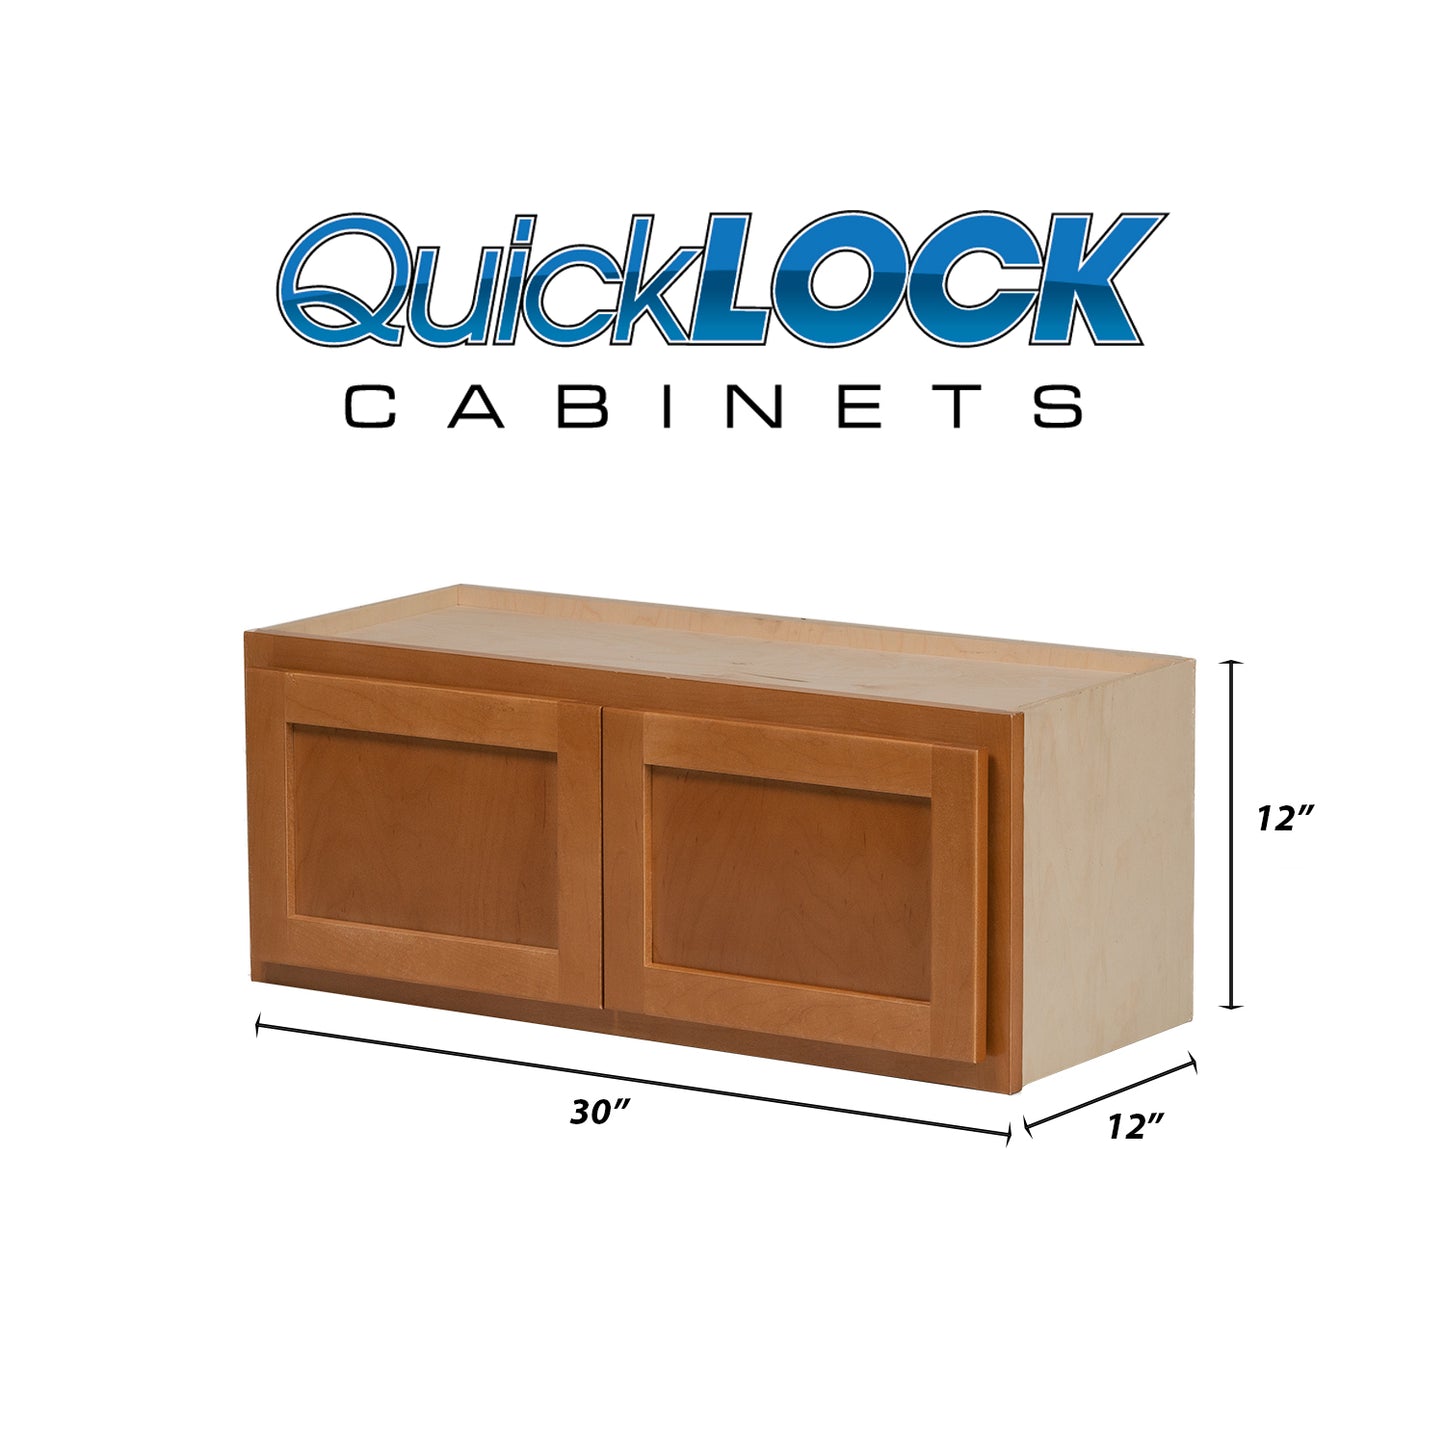 Quicklock RTA (Ready-to-Assemble) Provincial Stain 30"Wx12"Hx12"D Microwave Wall Cabinet